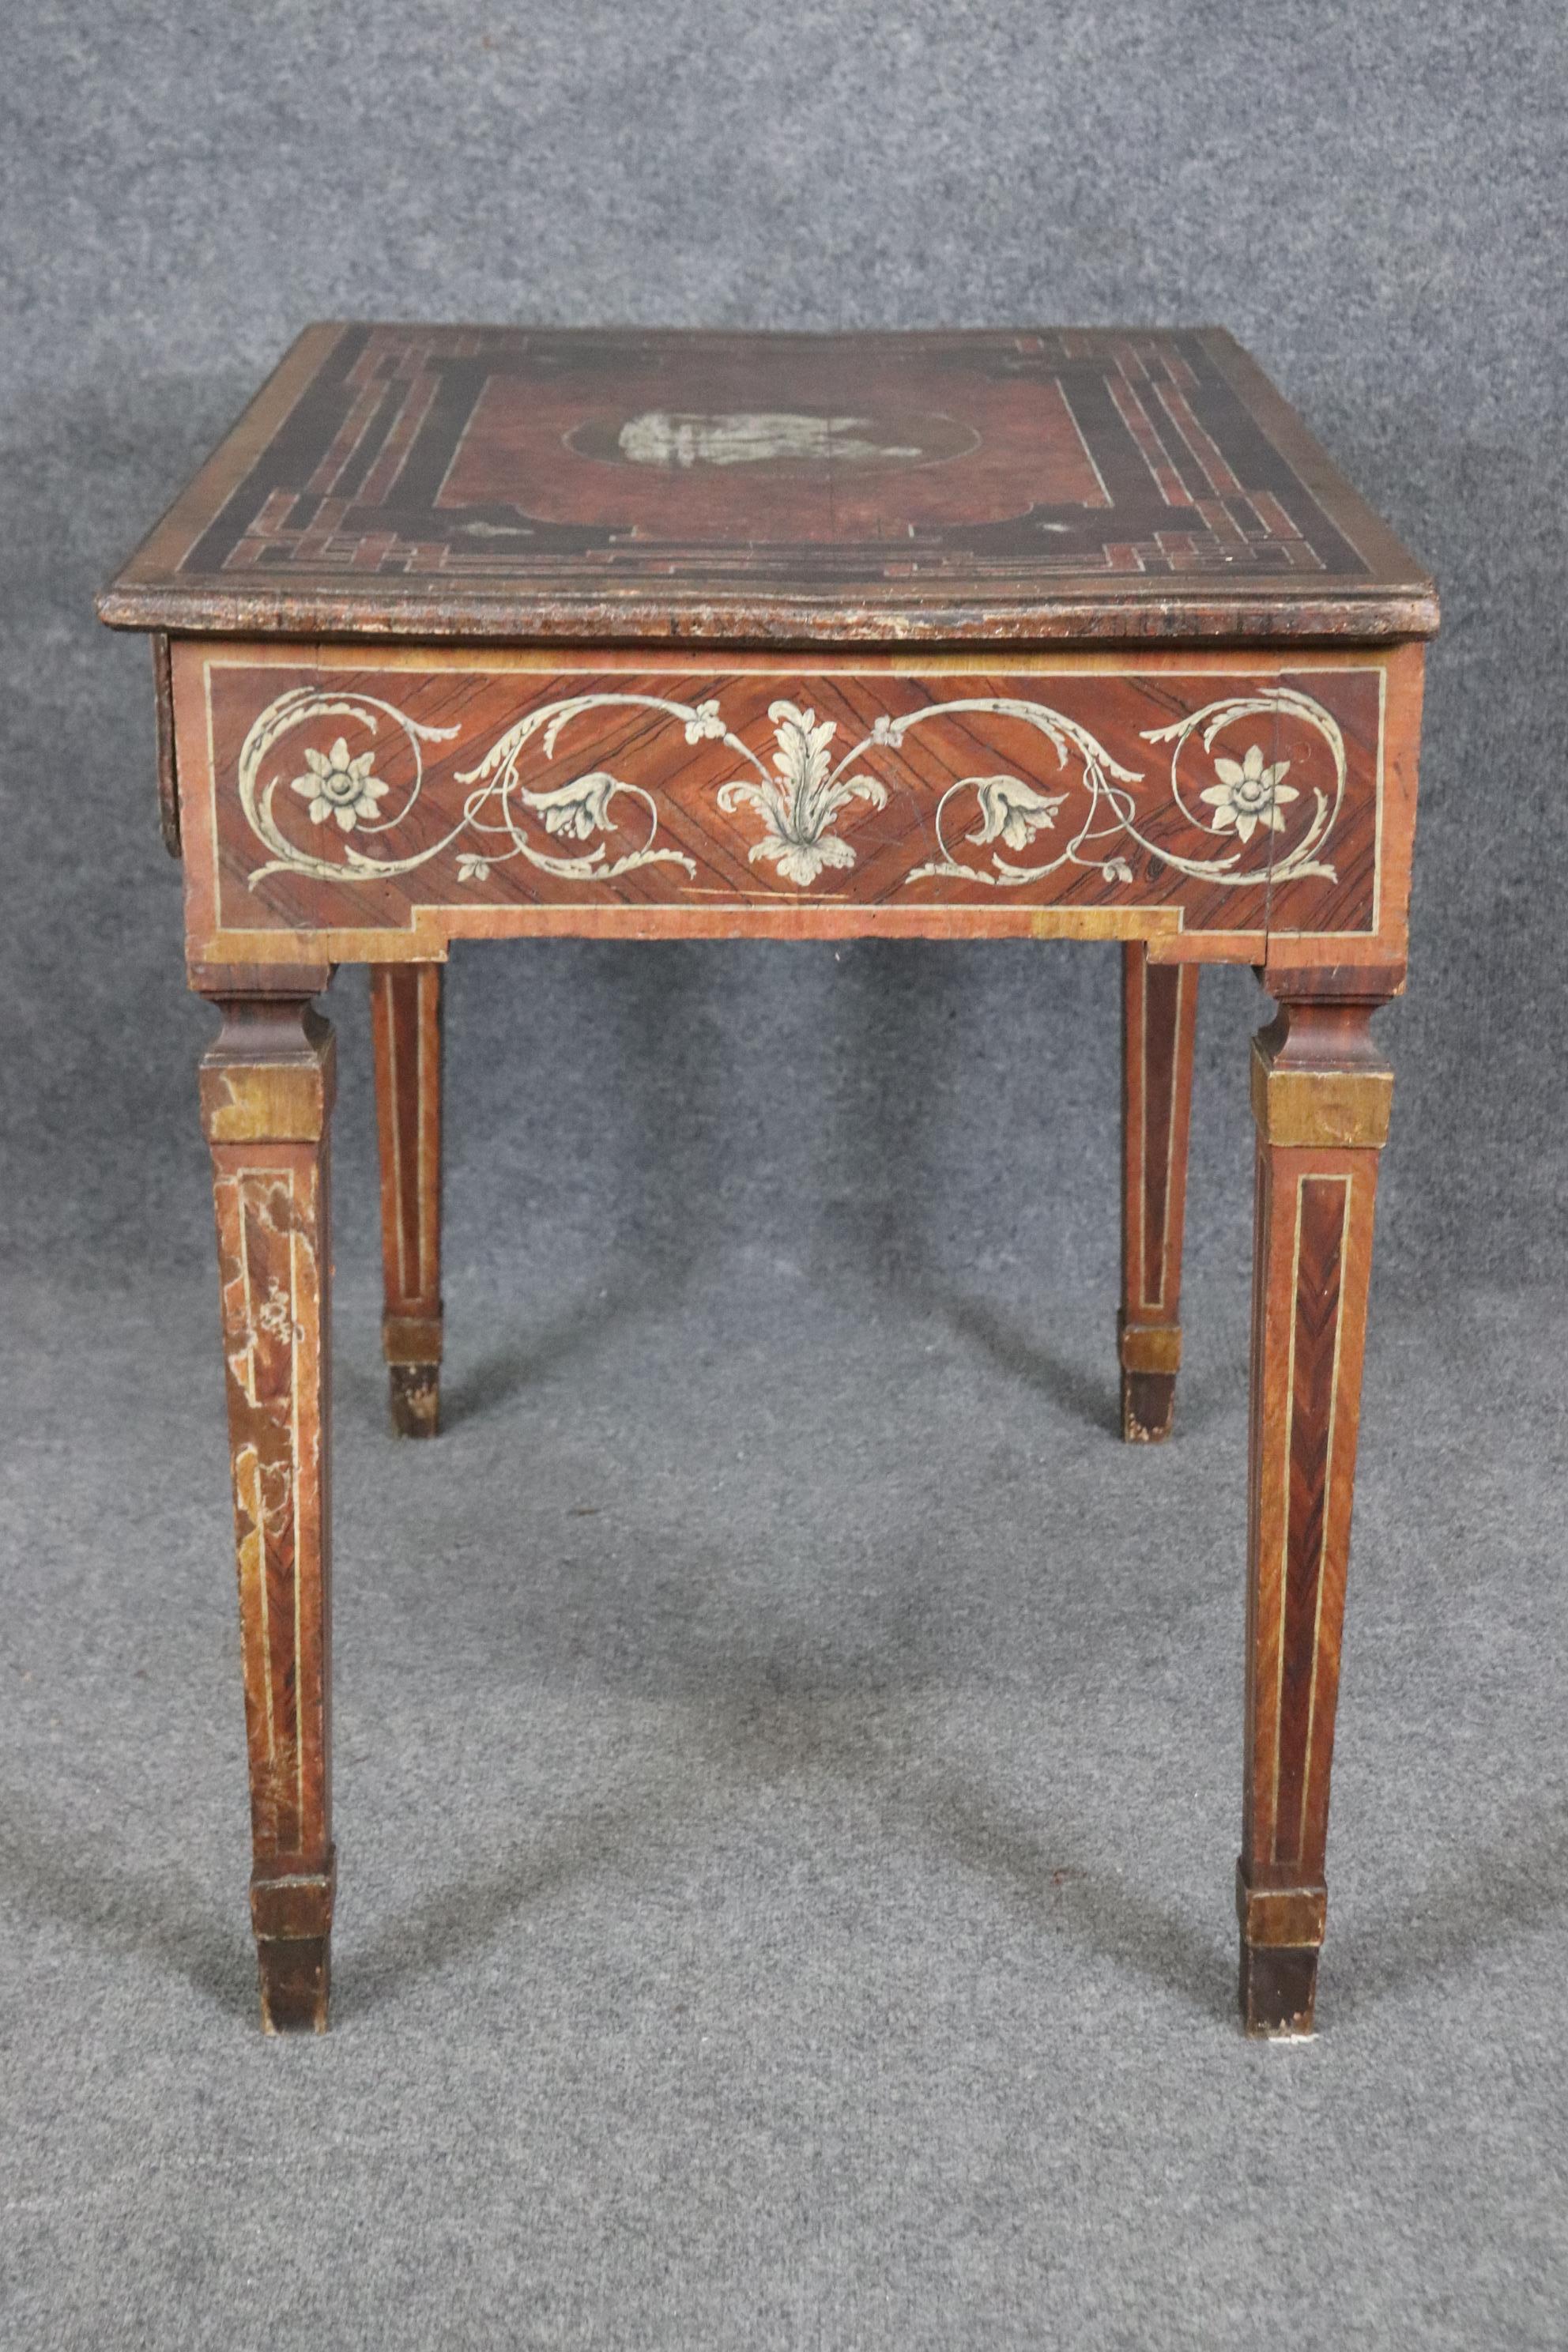 Neoclassical 18th century Italian Paint Decorated Writing Desk with Drawer Circa 1760s For Sale